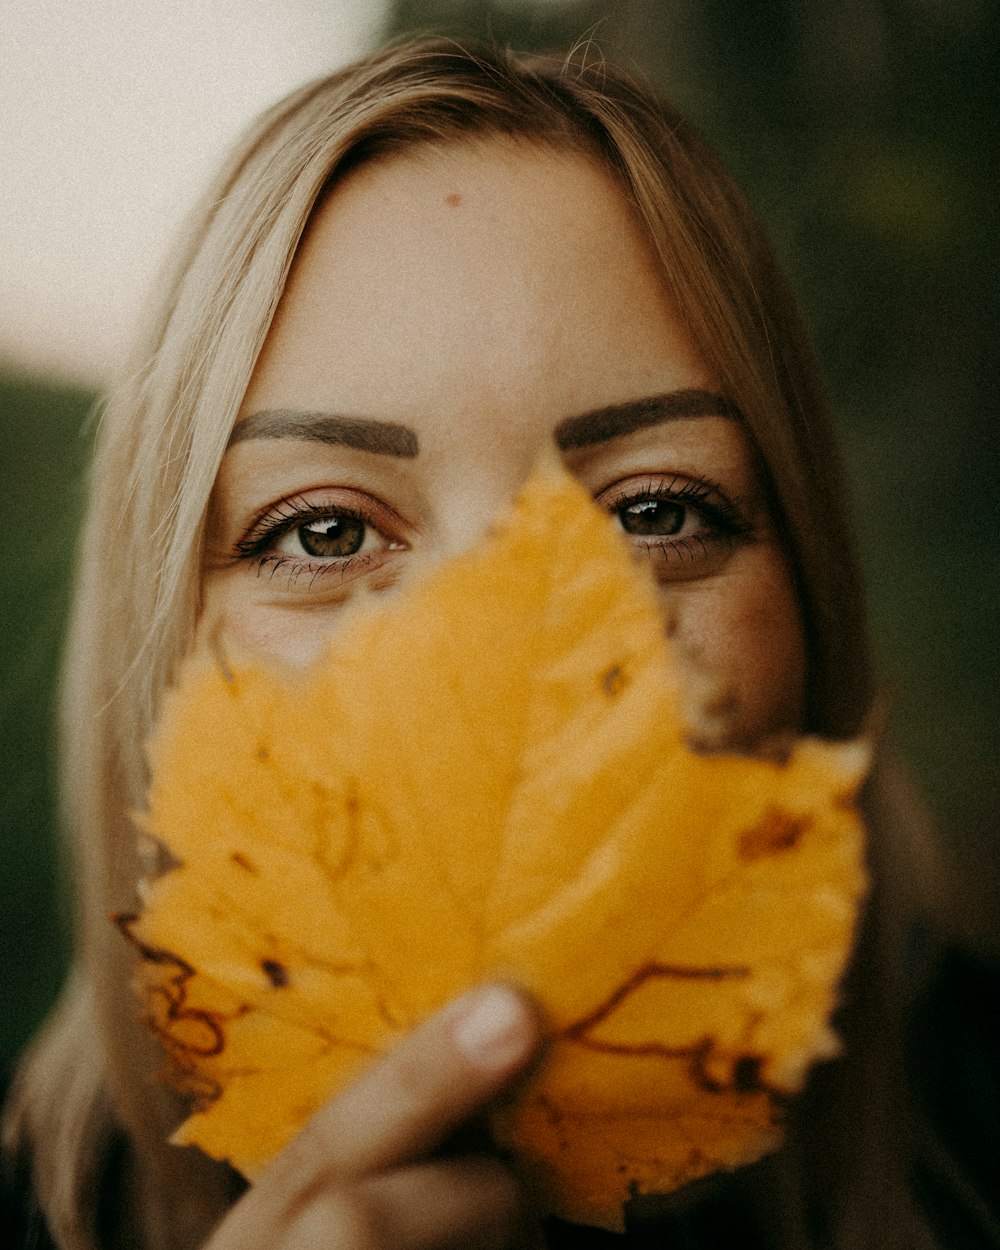 a woman holding a yellow leaf in front of her face